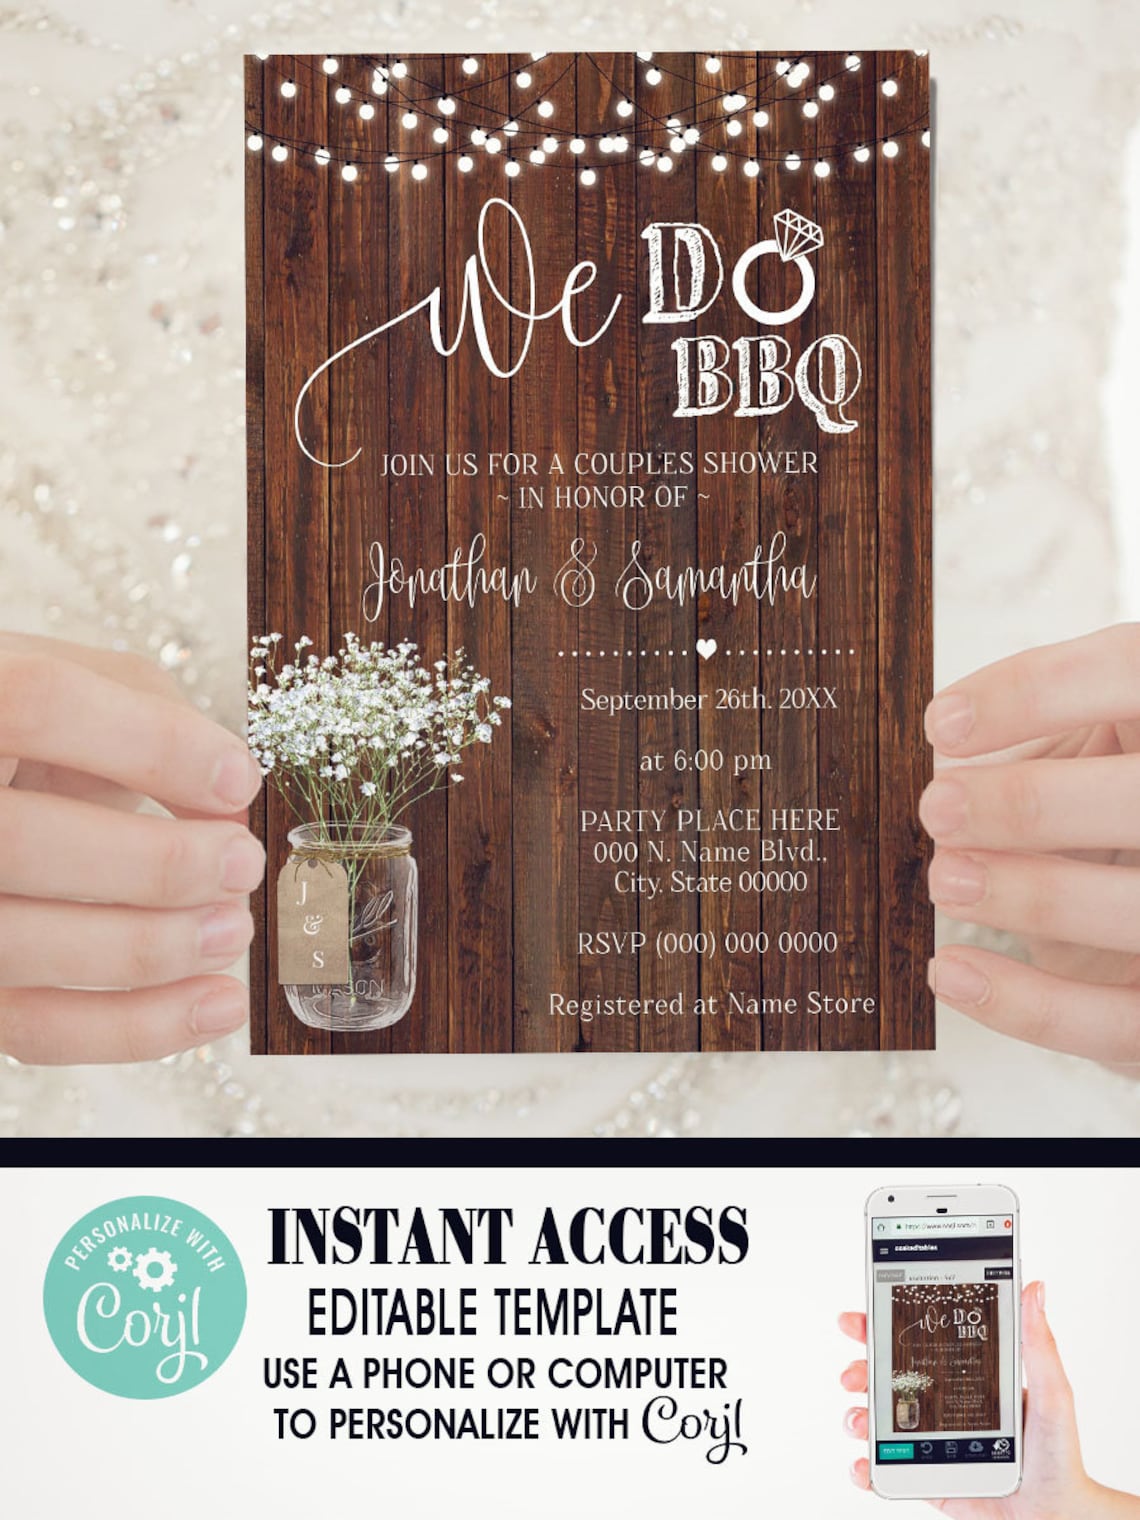 We do BBQ couples shower invitation country western chic image 1